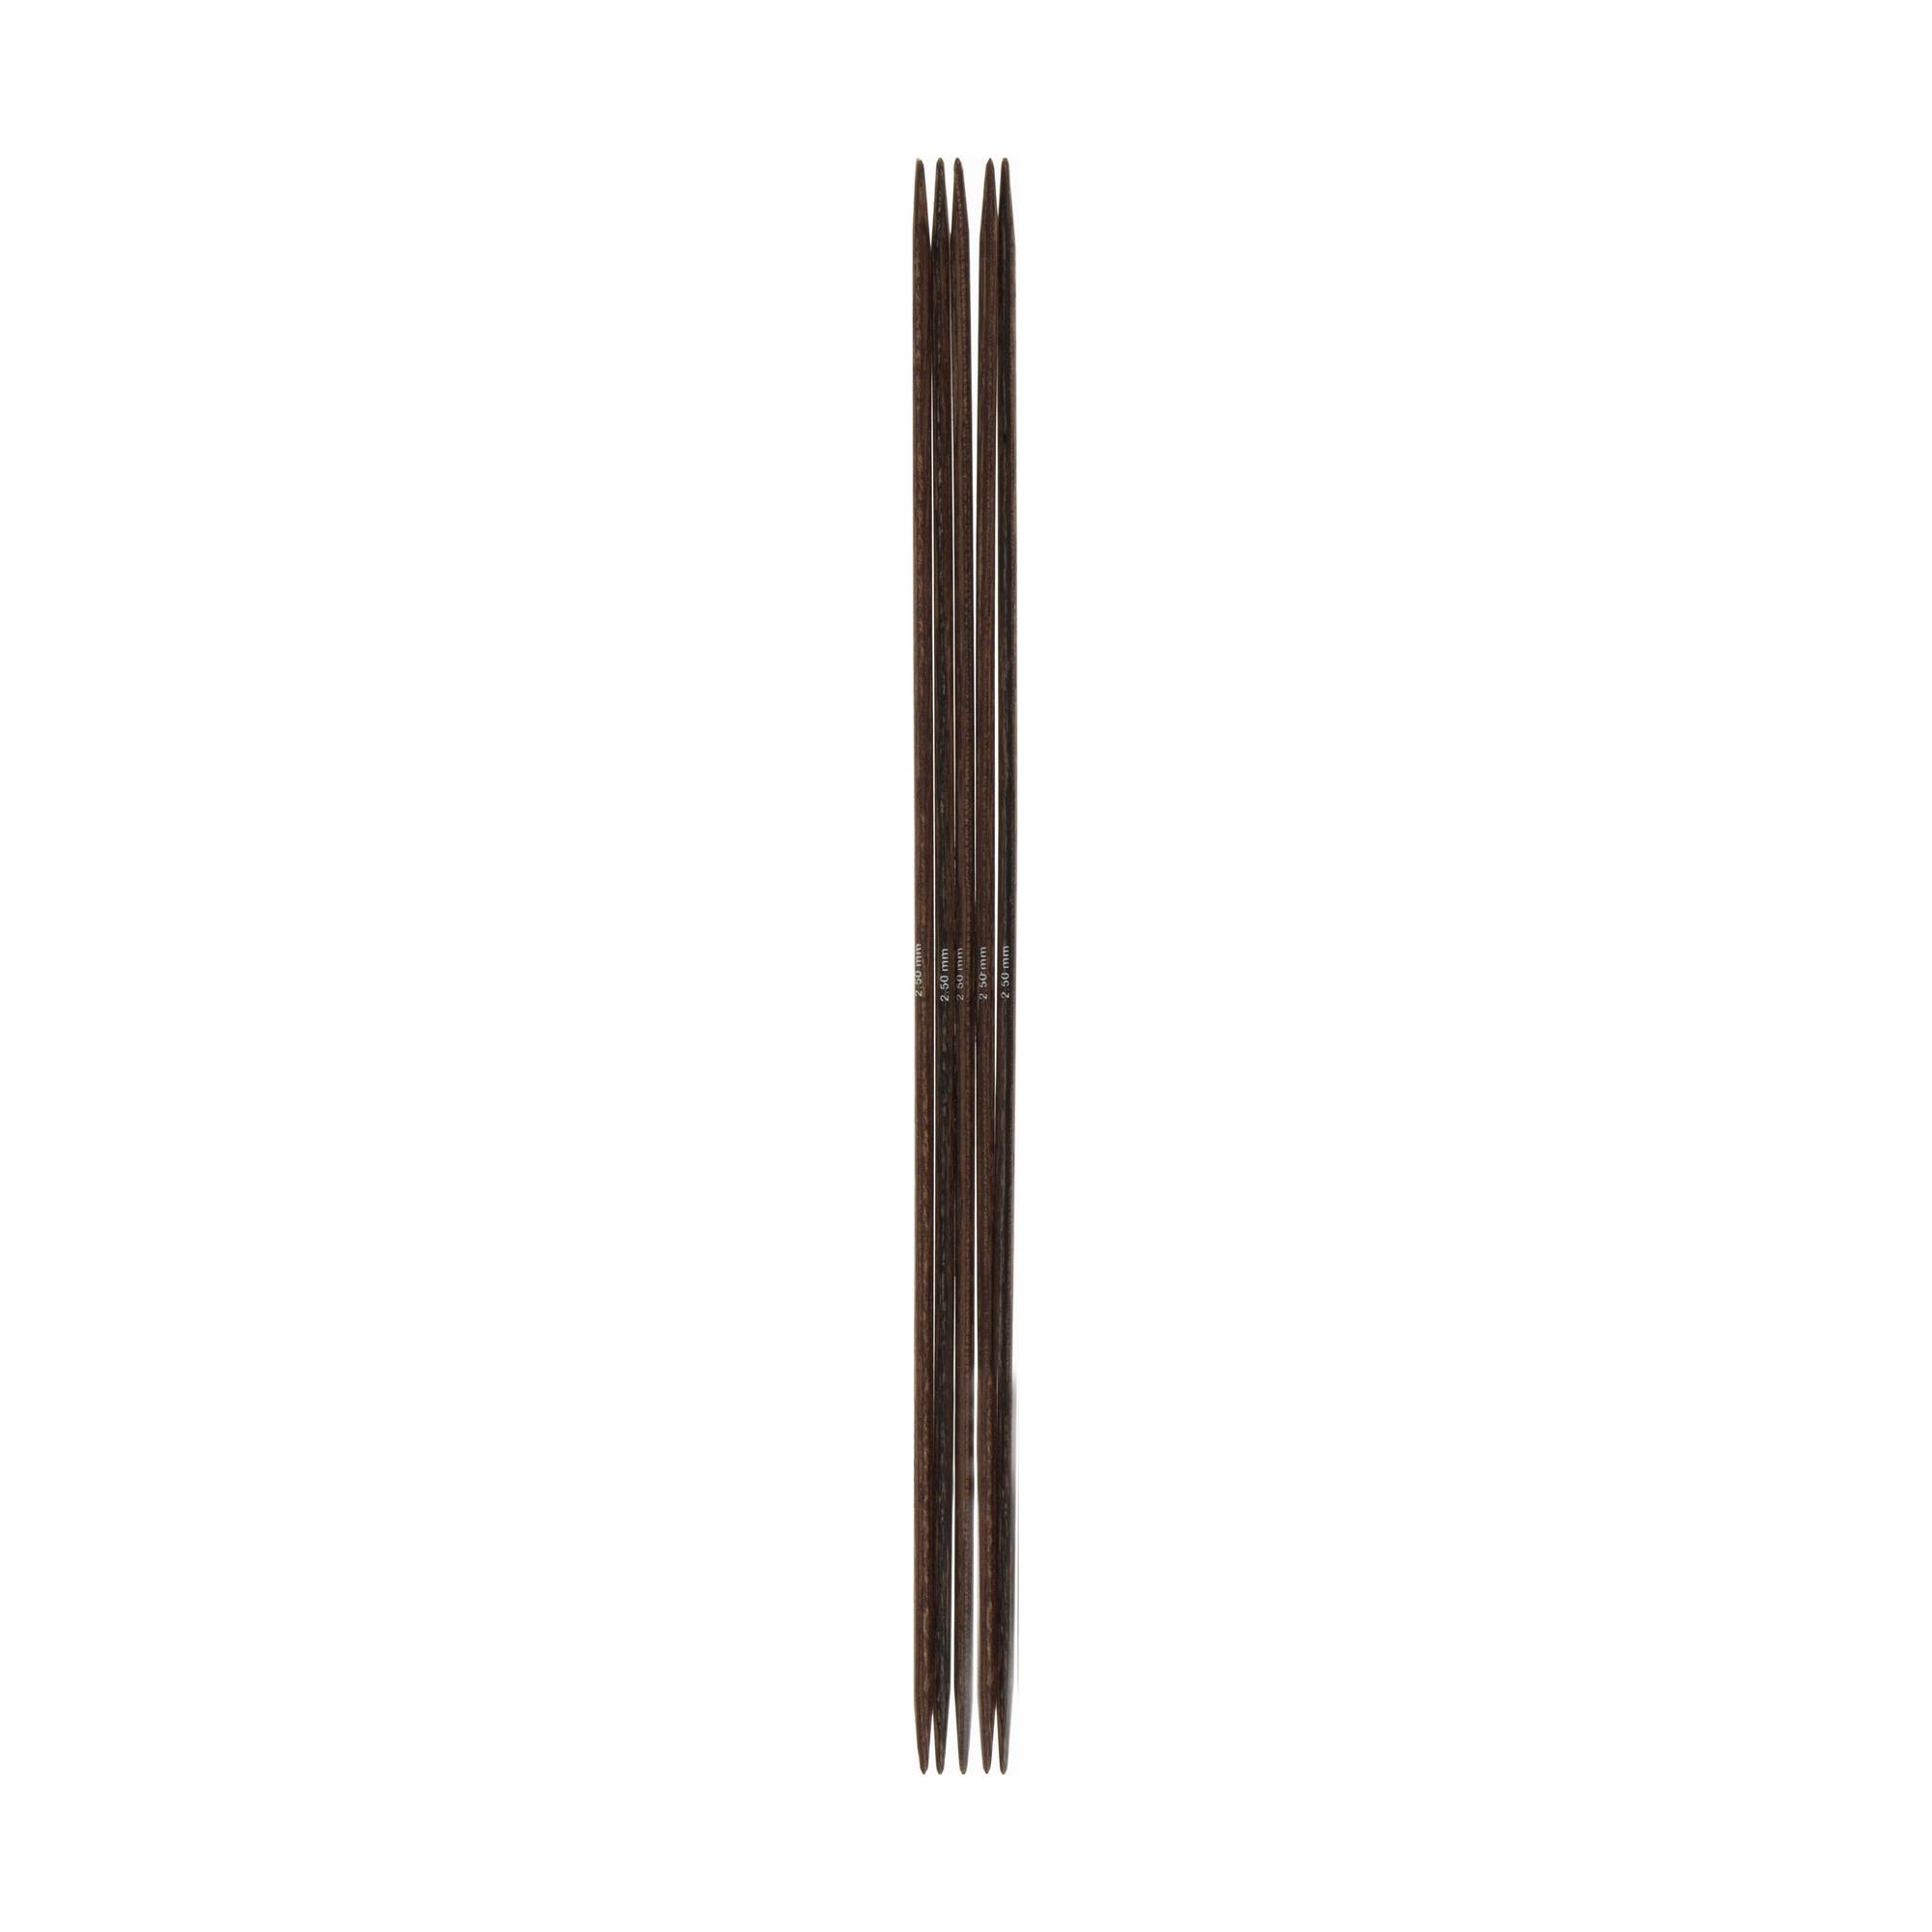 Milward Double-Ended Knitting Needles 2.5mm x 20cm 5 Pack